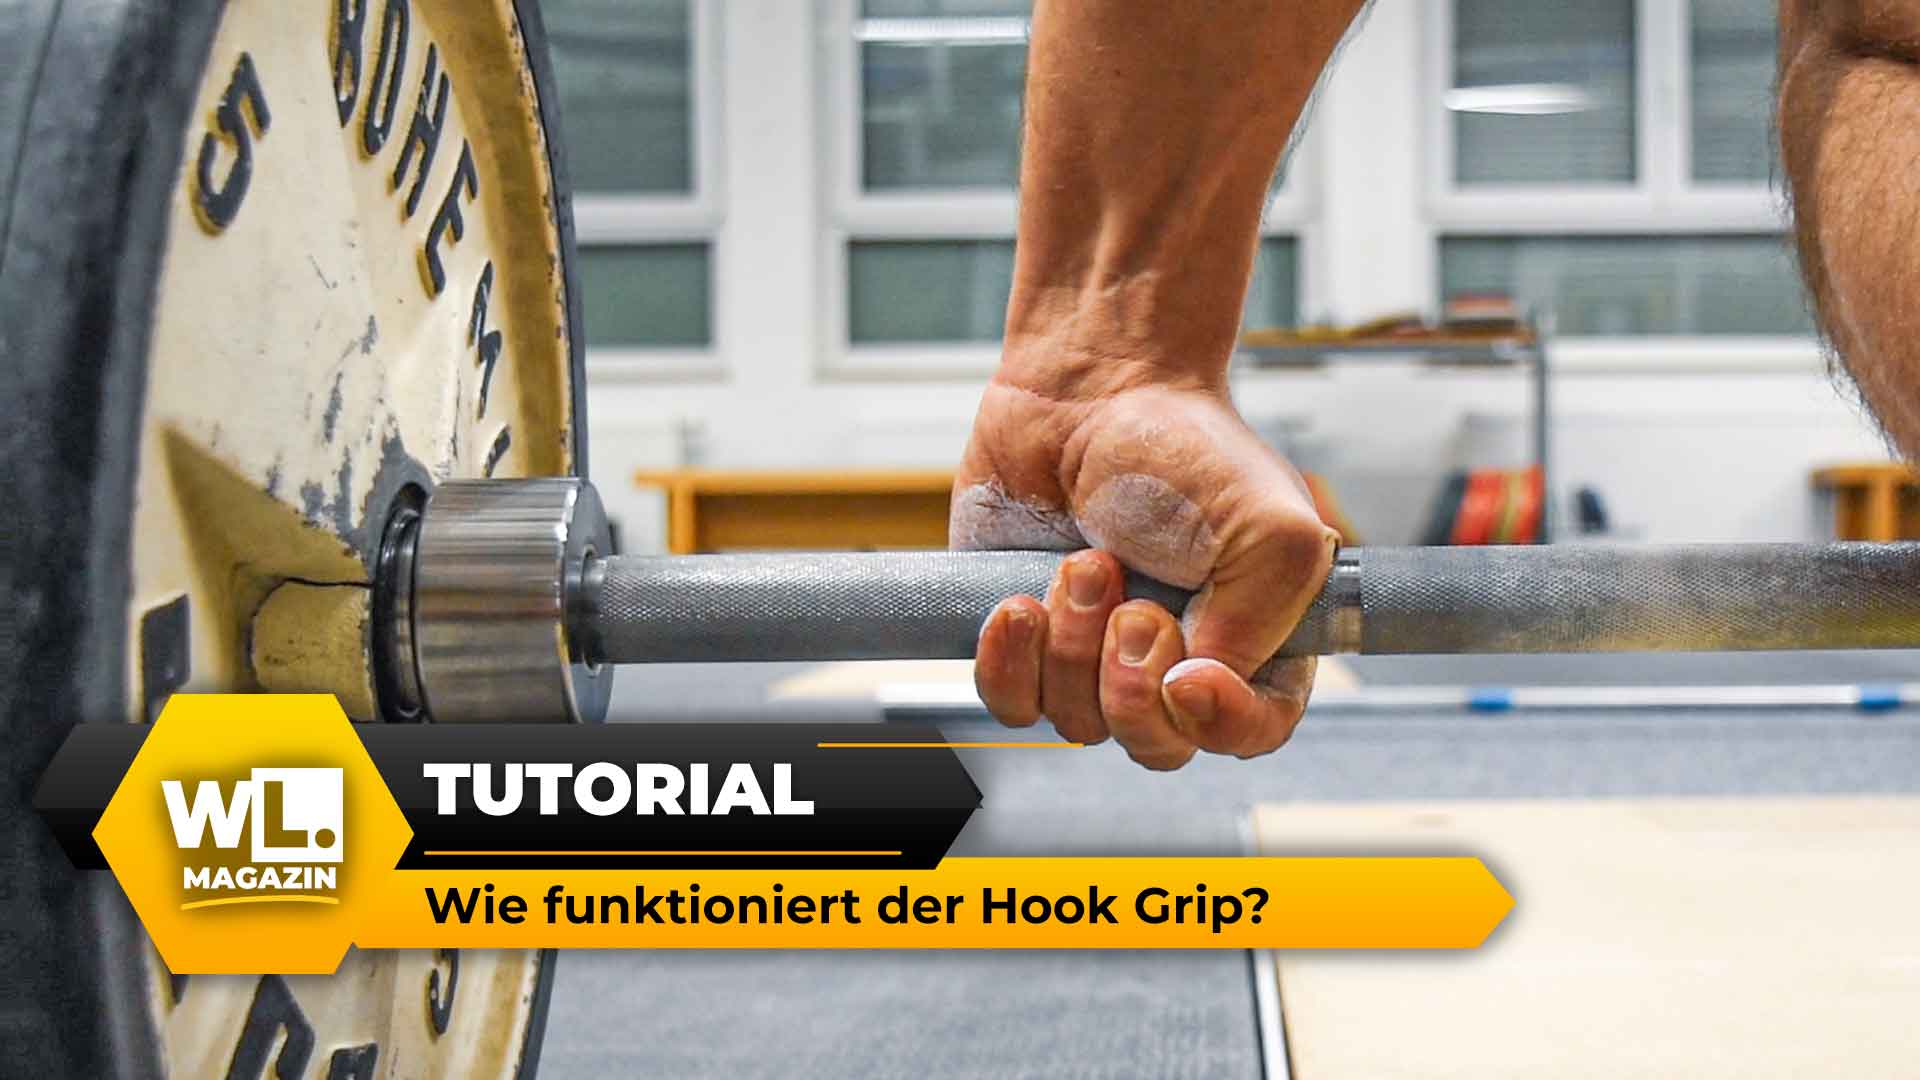 The Hook Grip - The strongest grip in weightlifting